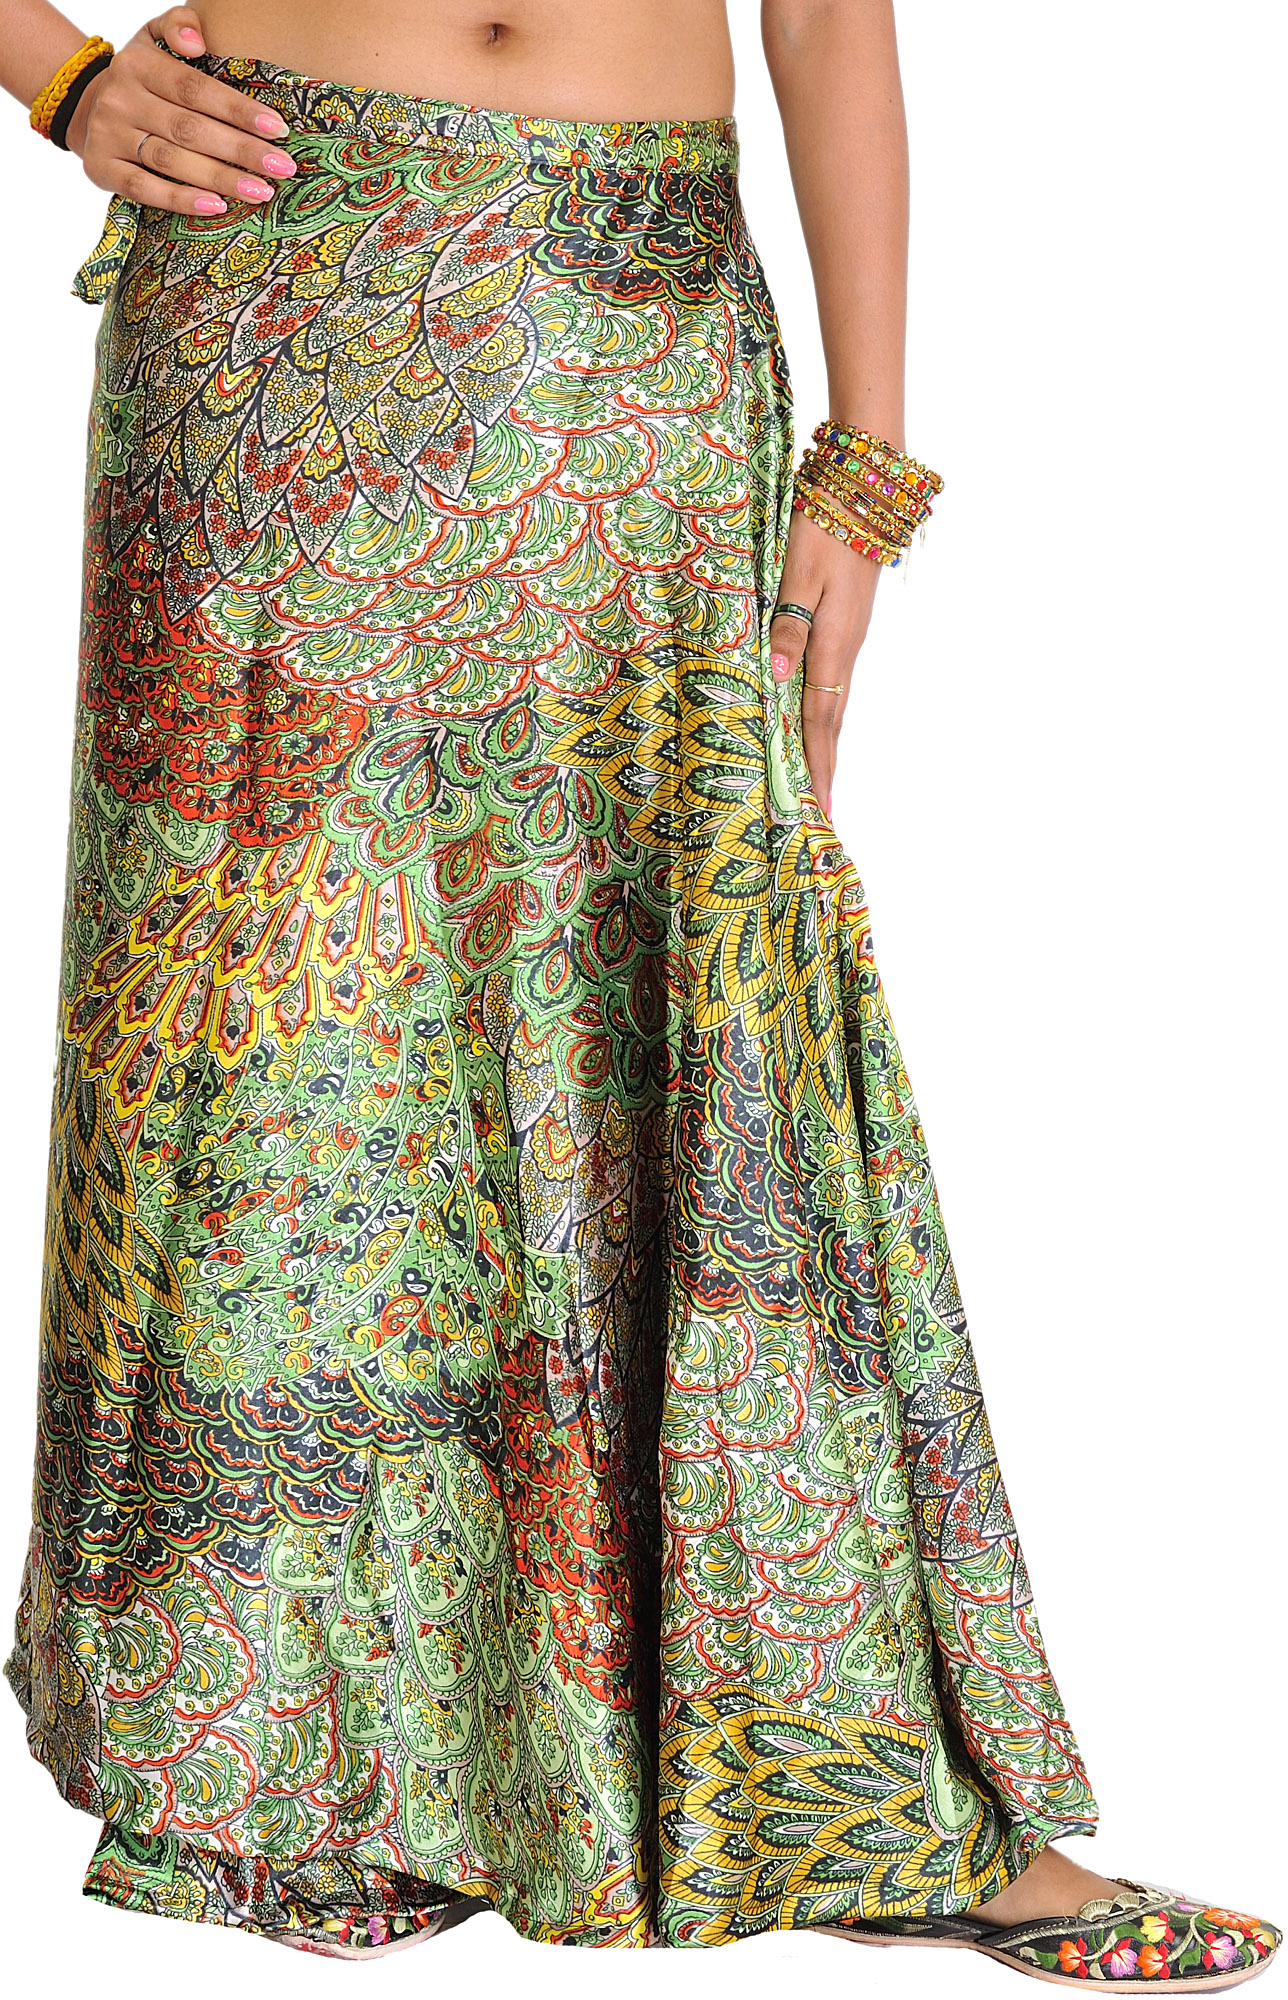 Wrap-Around Long Skirt with Printed Flowers | Exotic India Art